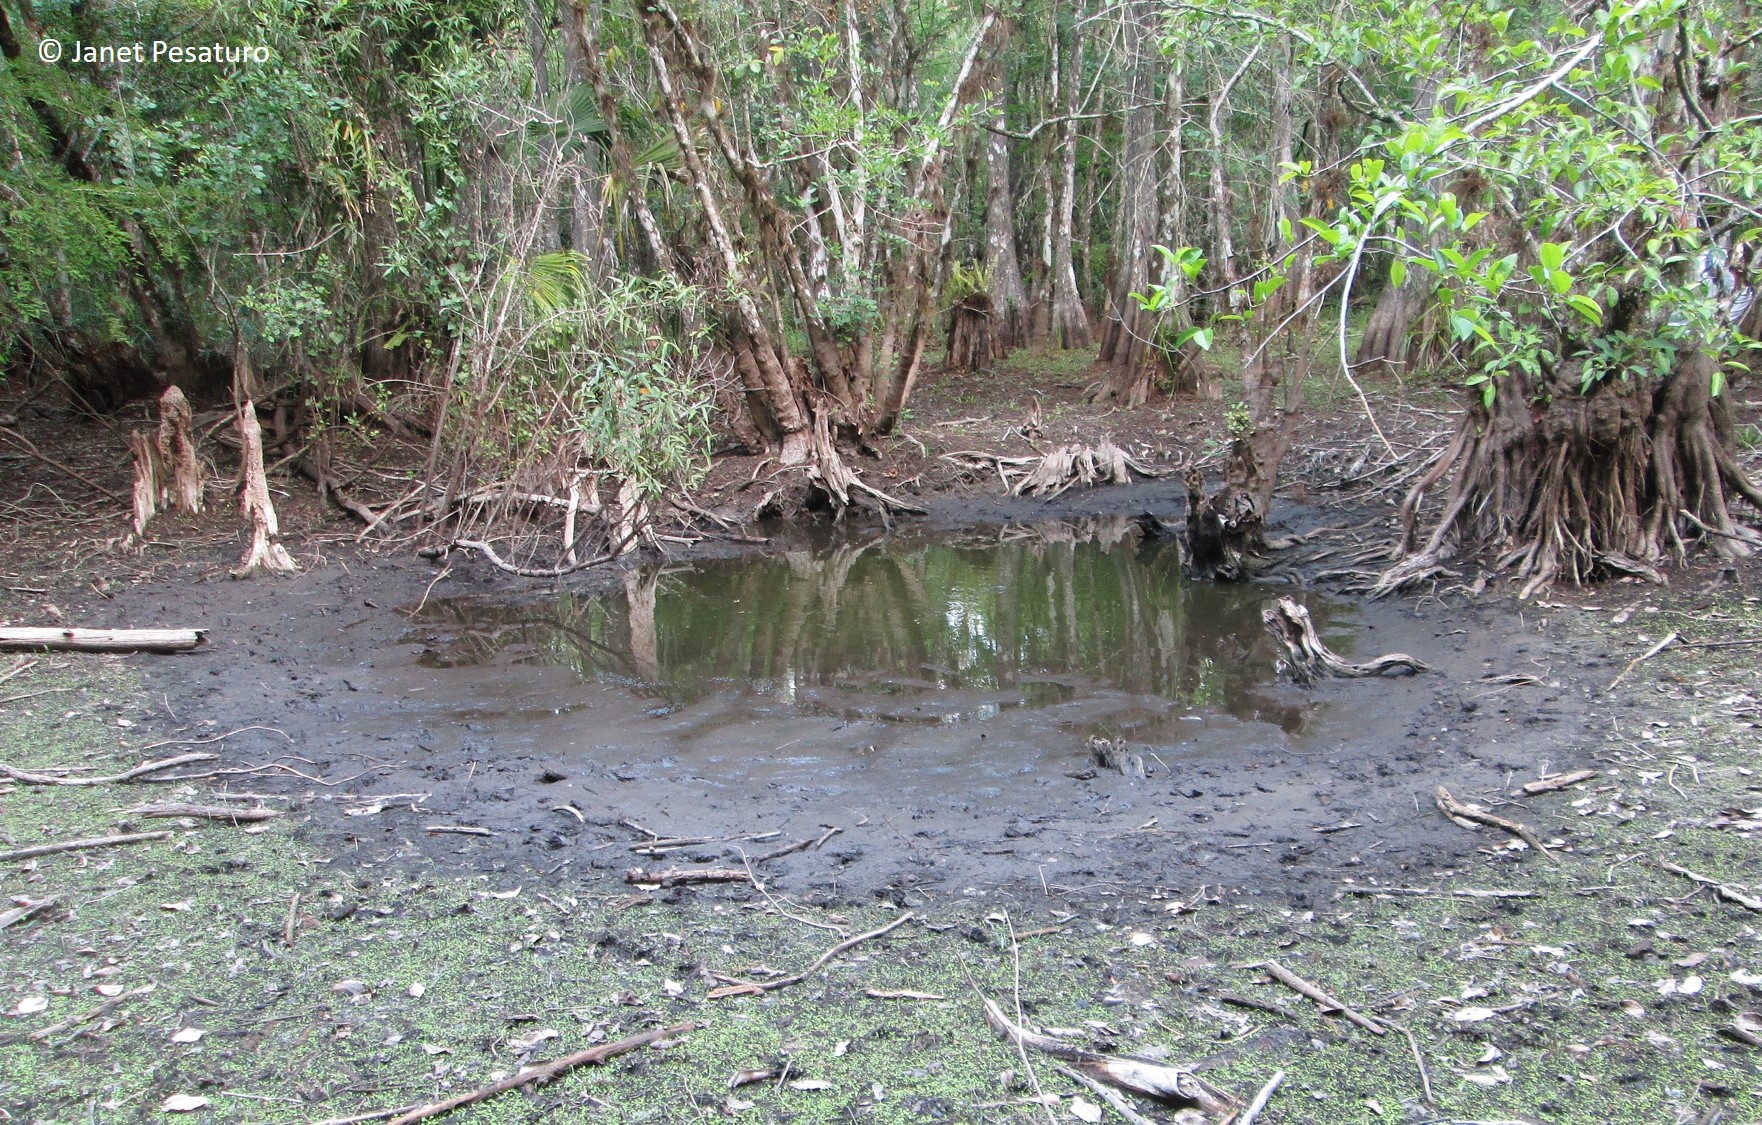 a "gator hole", a water hole maintained by an alligator